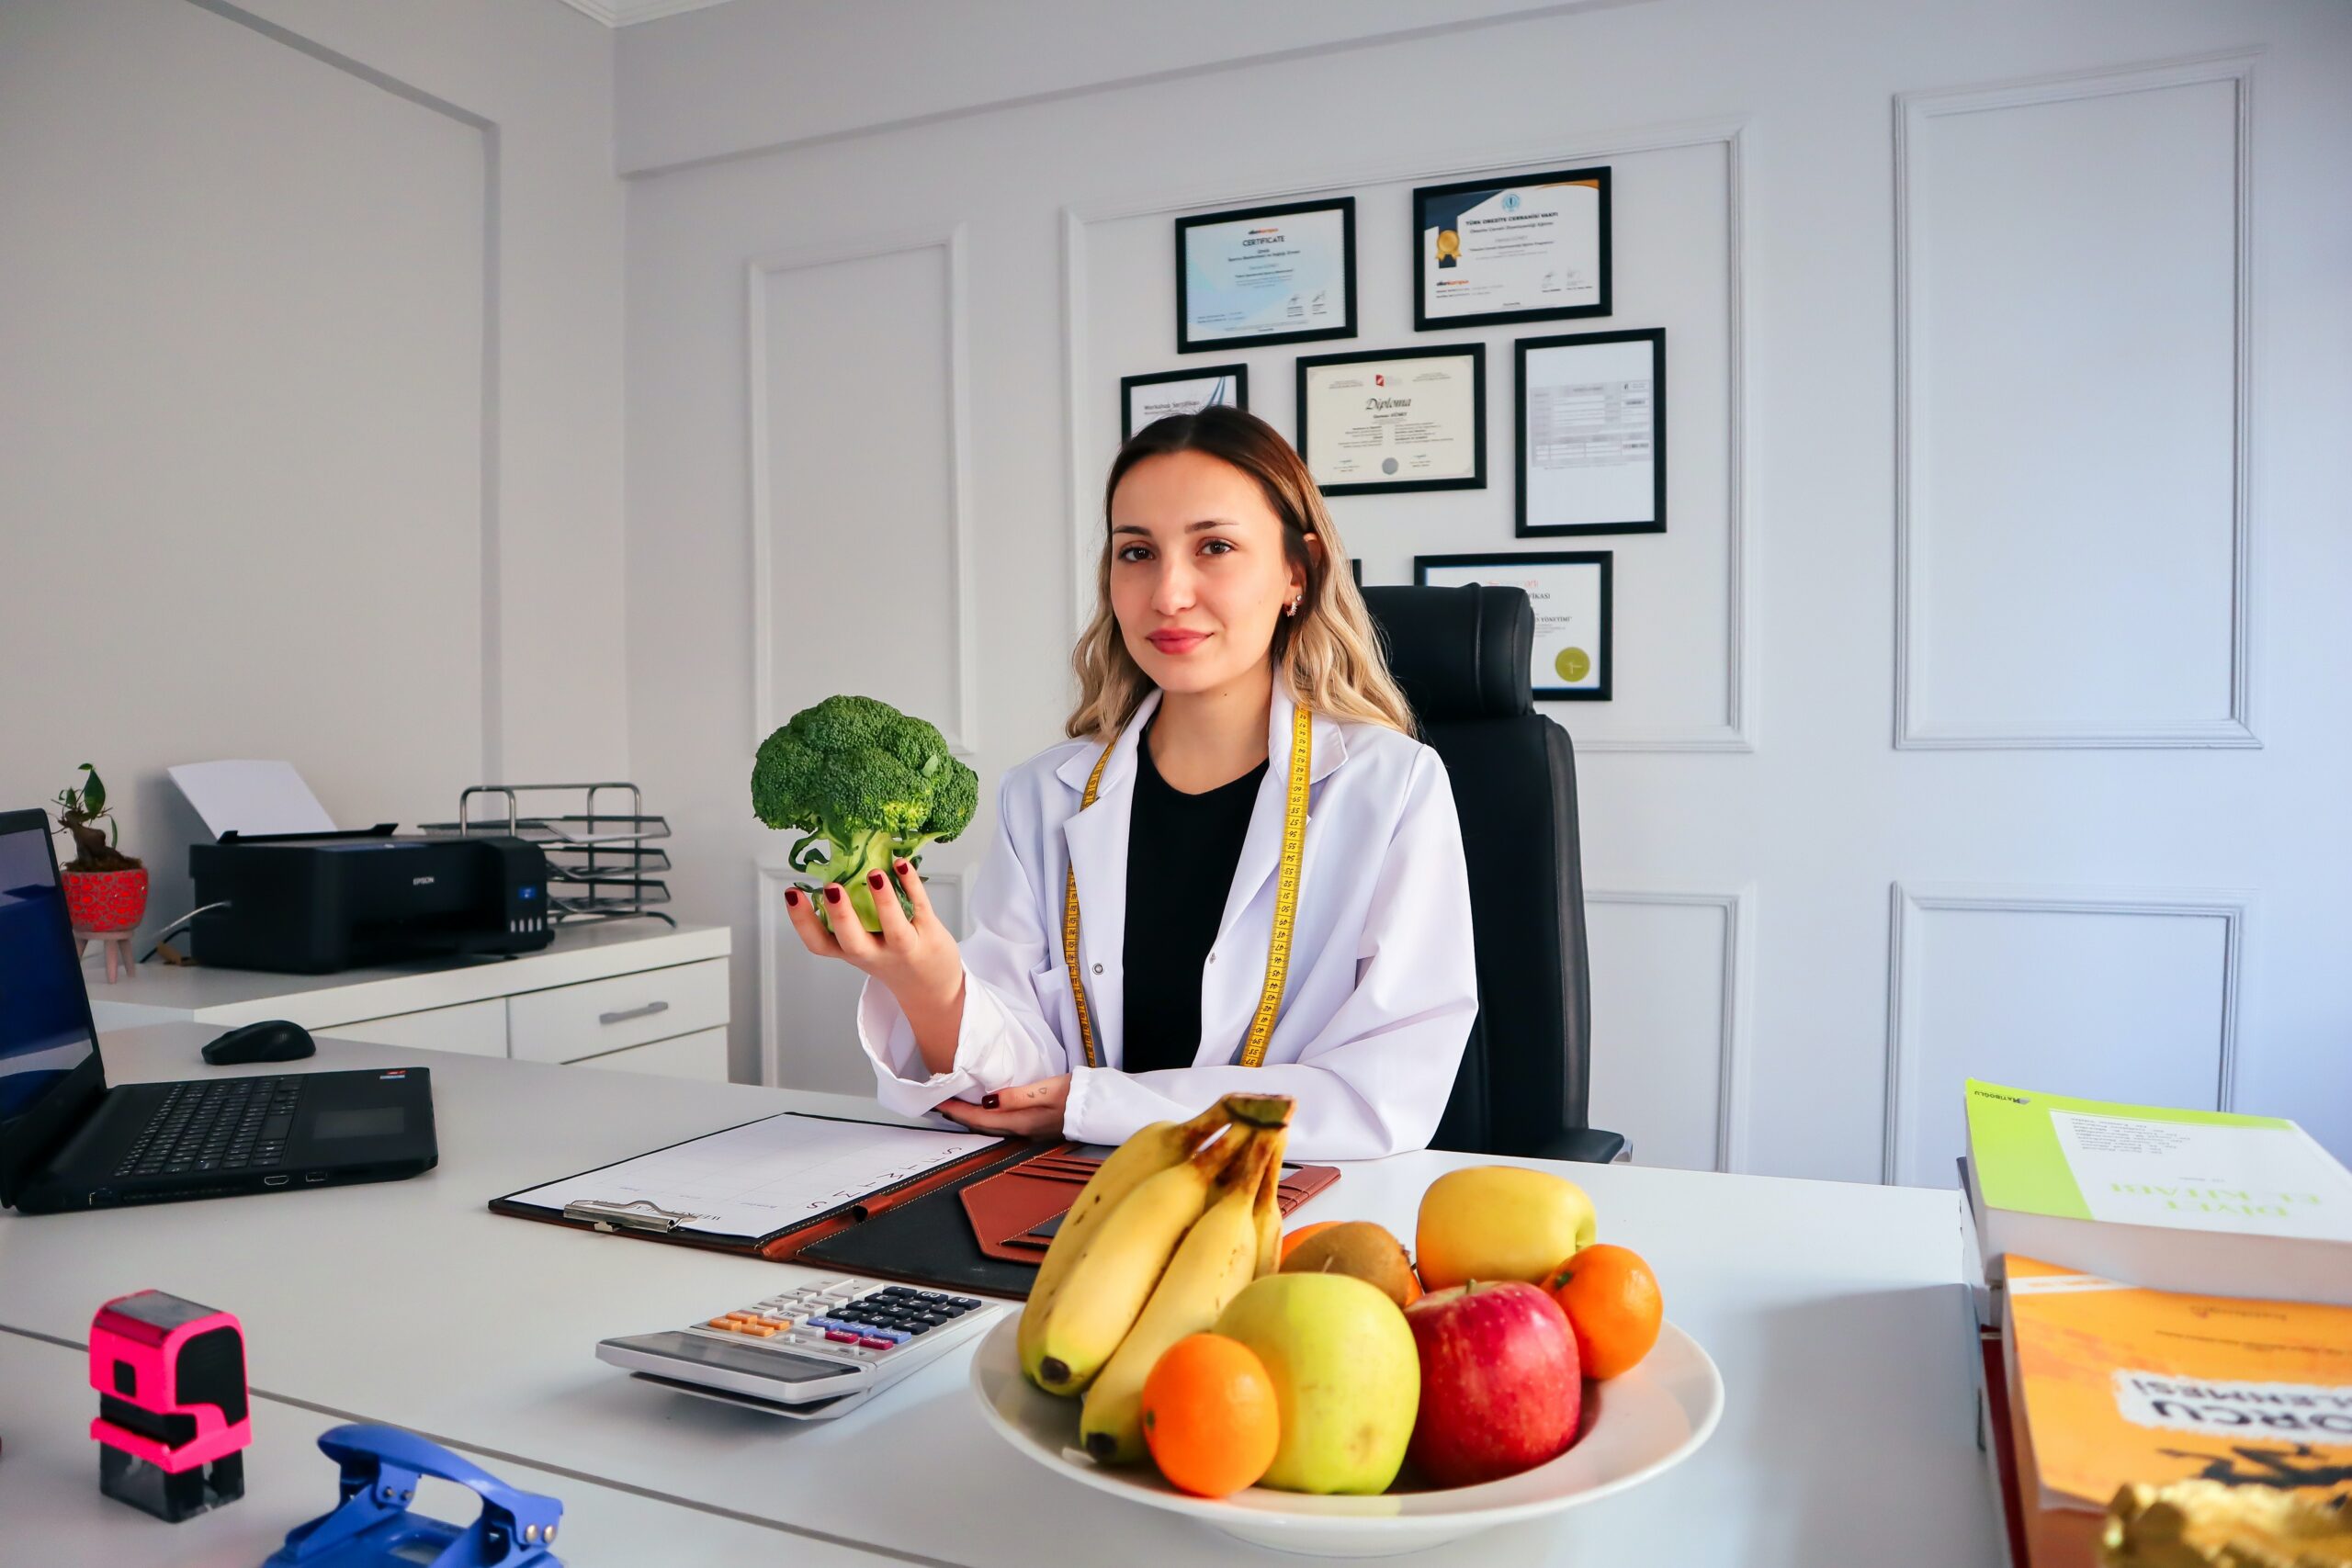 A nutritionist